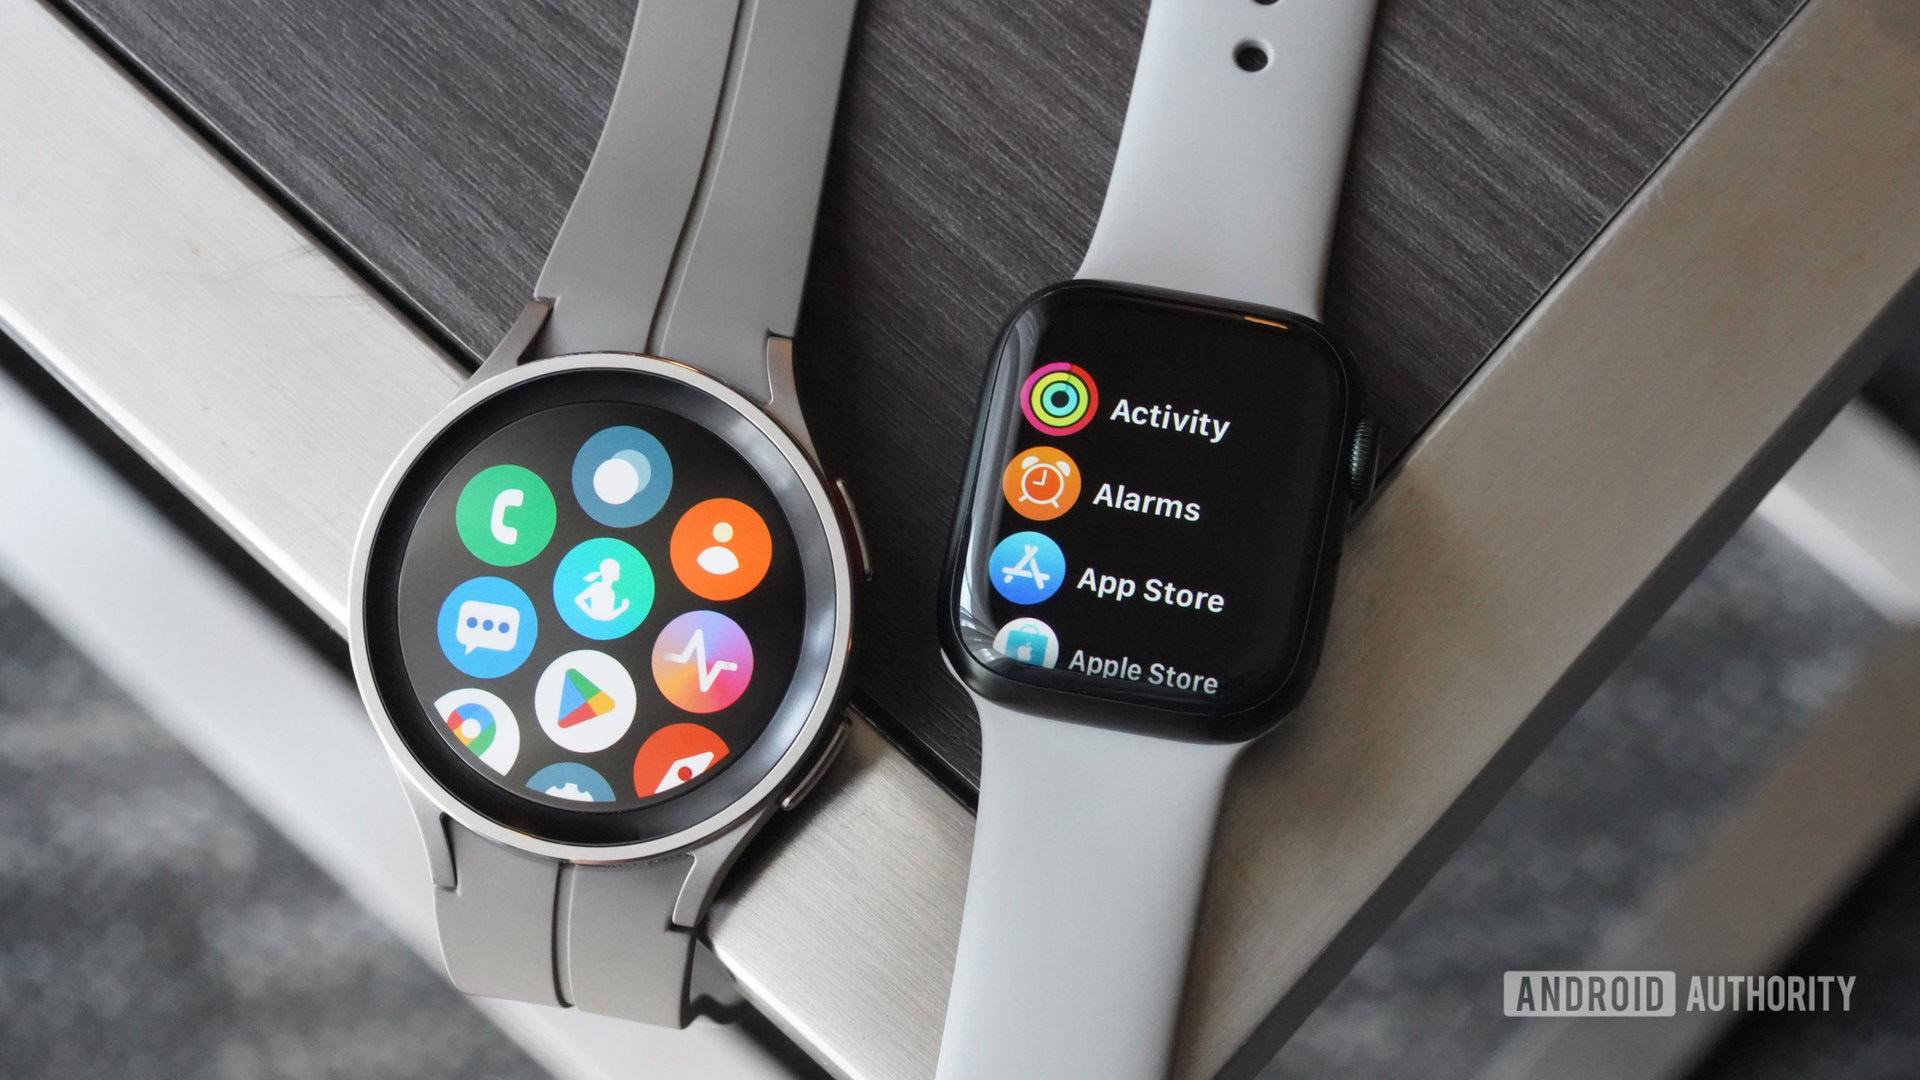 Apple Watch, iWatch and Smart Watches